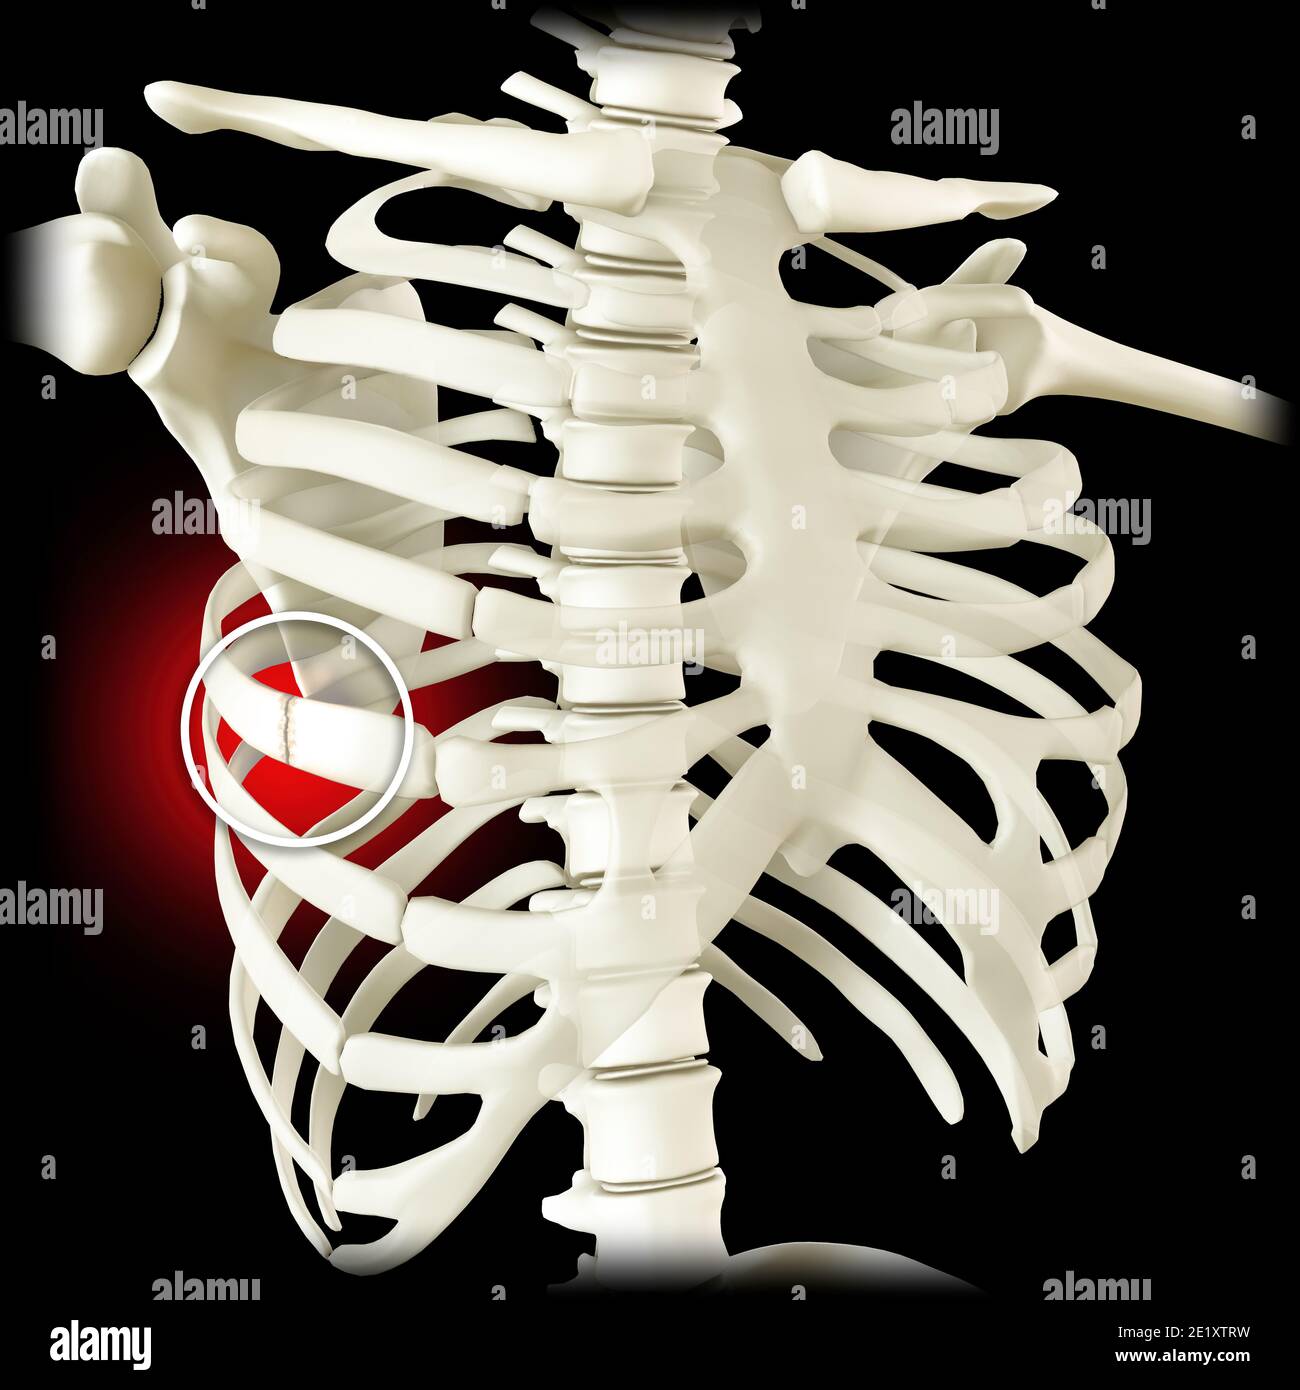 Anatomy And The Human Body Costochondral Separation Separated Rib Broken Fractured Ribs Bones In The Rib Cage Breaks Or Cracks Chest Lungs Stock Photo Alamy